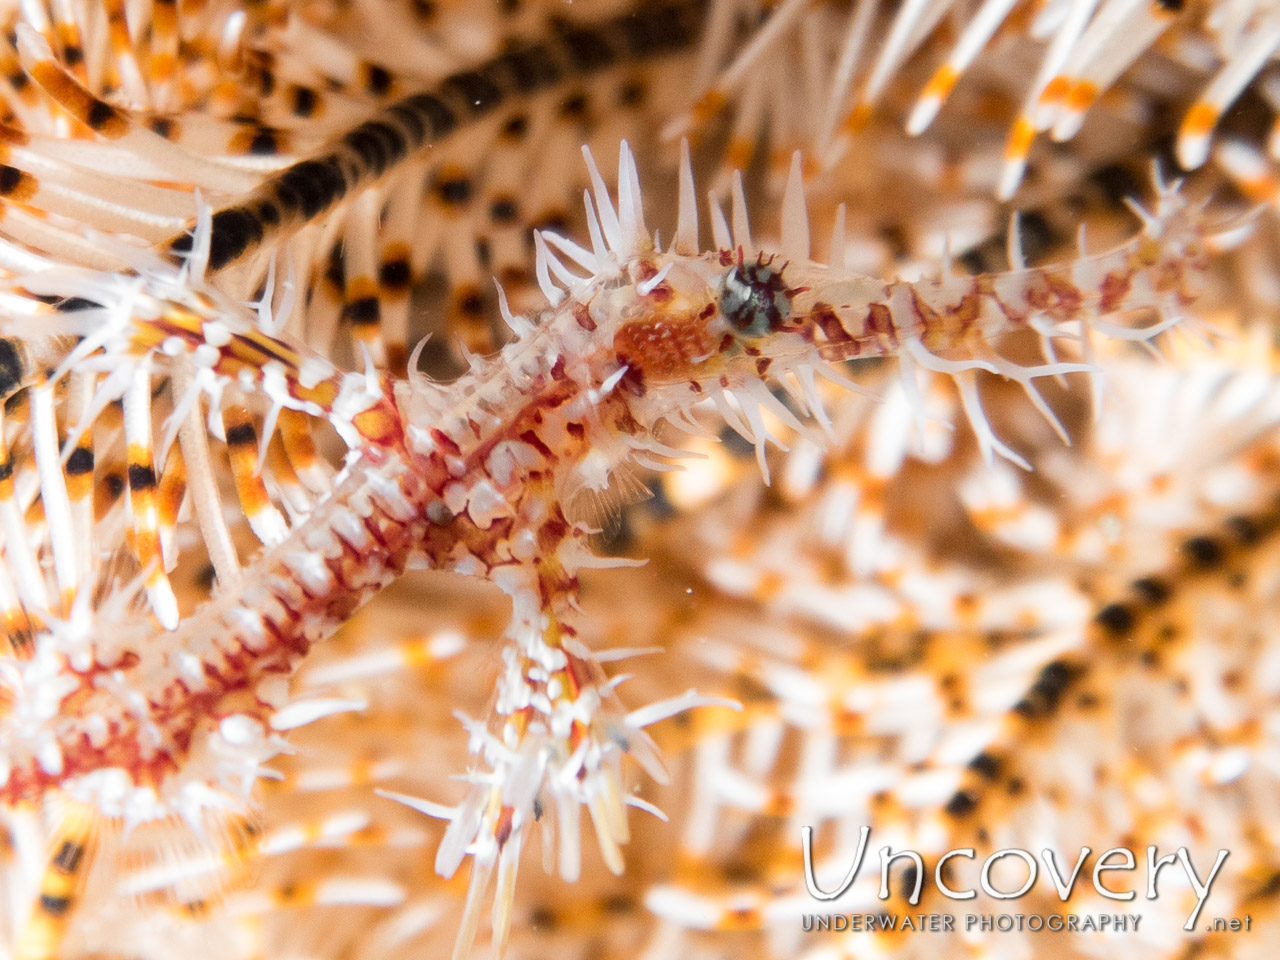 Ornate Ghost Pipefish (solenostomus Paradoxus), photo taken in Indonesia, North Sulawesi, Lembeh Strait, Goby a Crab